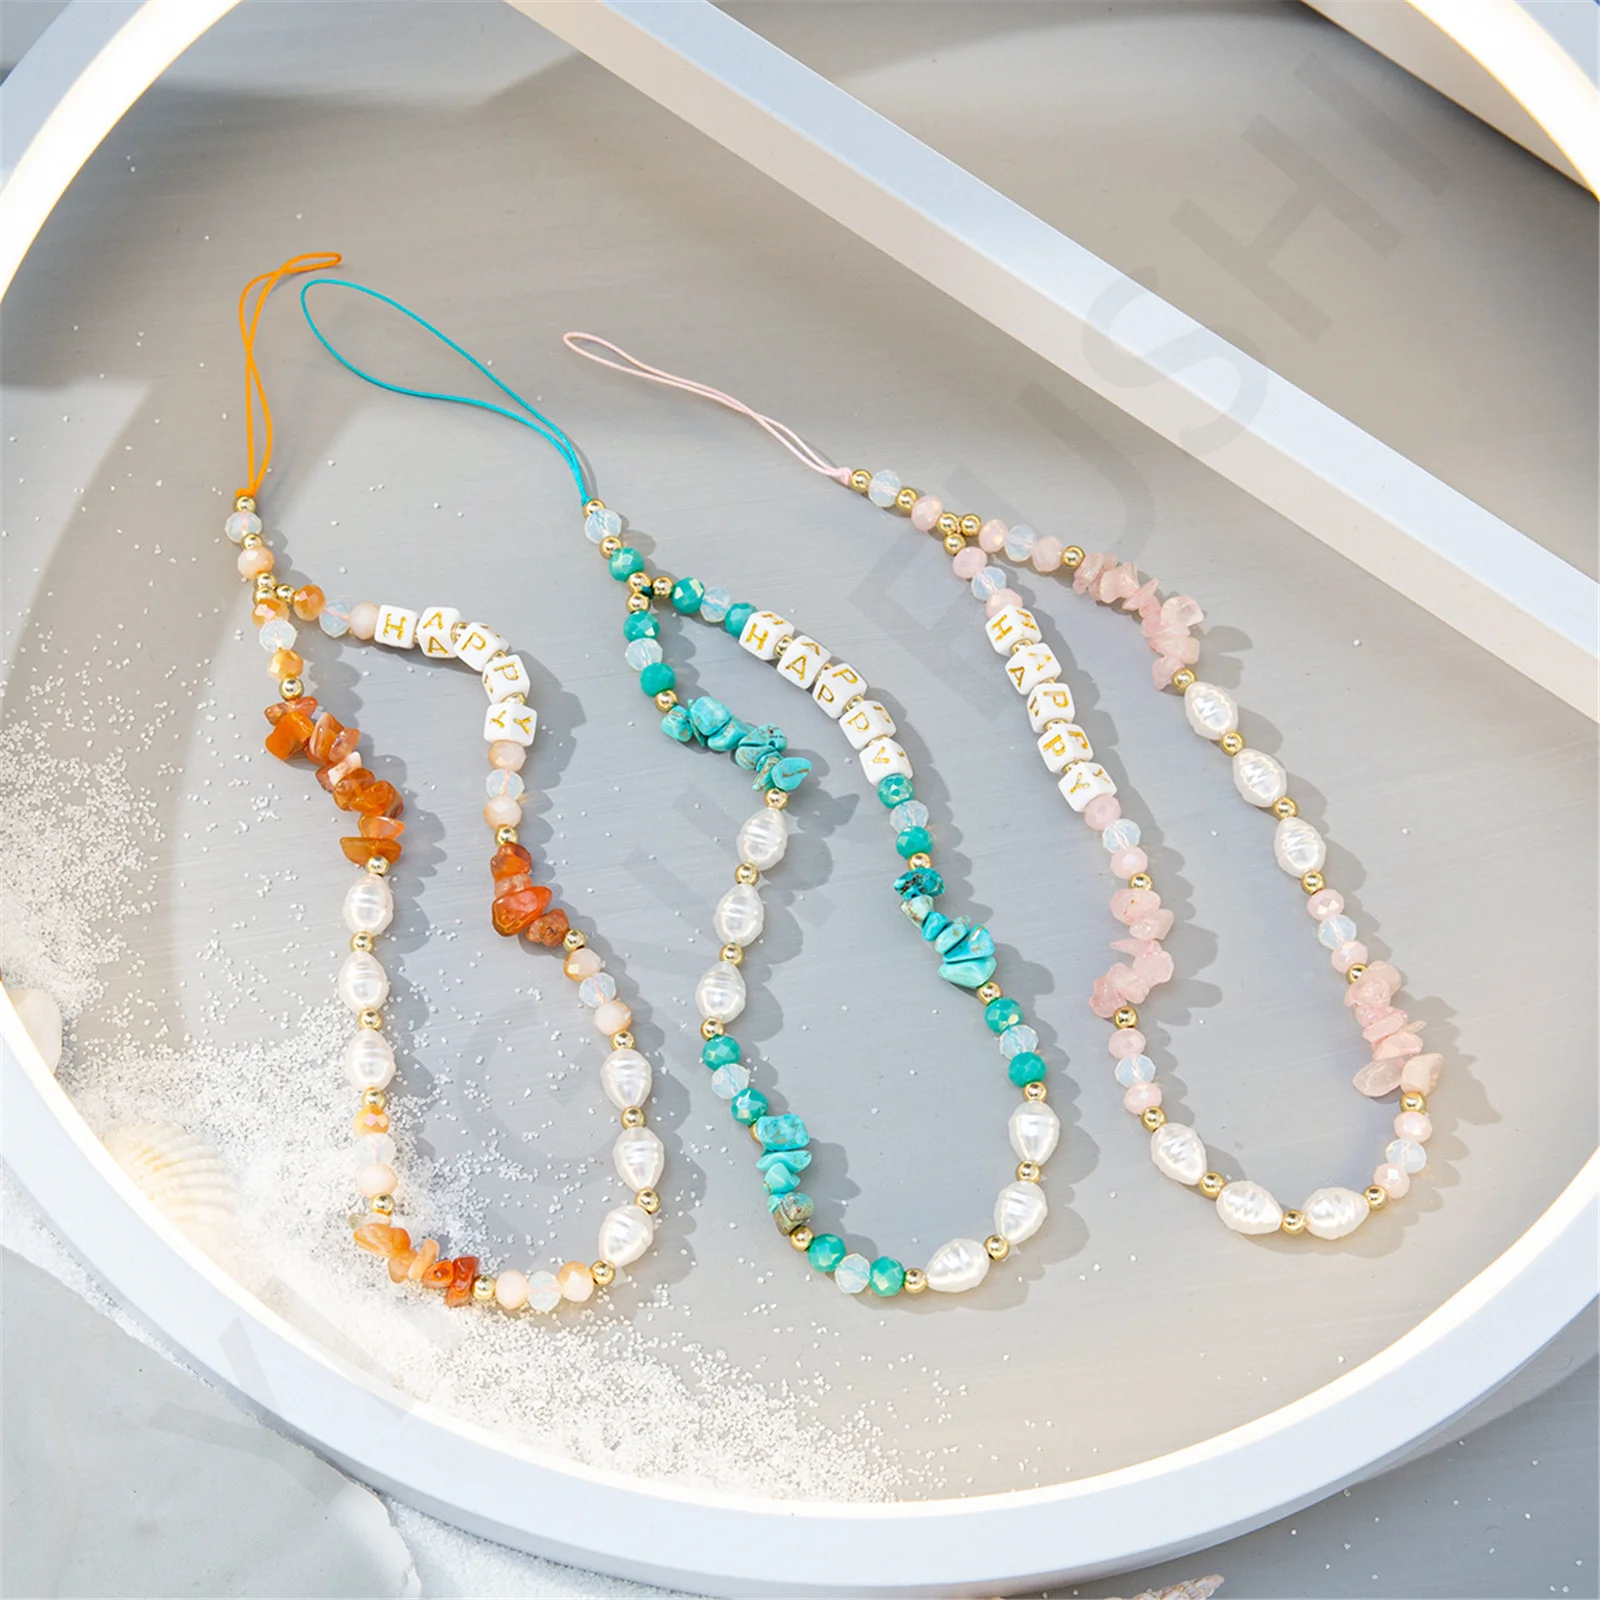 

Gravel Pearl Mobile Phone Chain Fashion Beaded Cellphone Straps Charm Hanging Chain Anti-Lost Lanyard Wrist Strap Keychain Cord